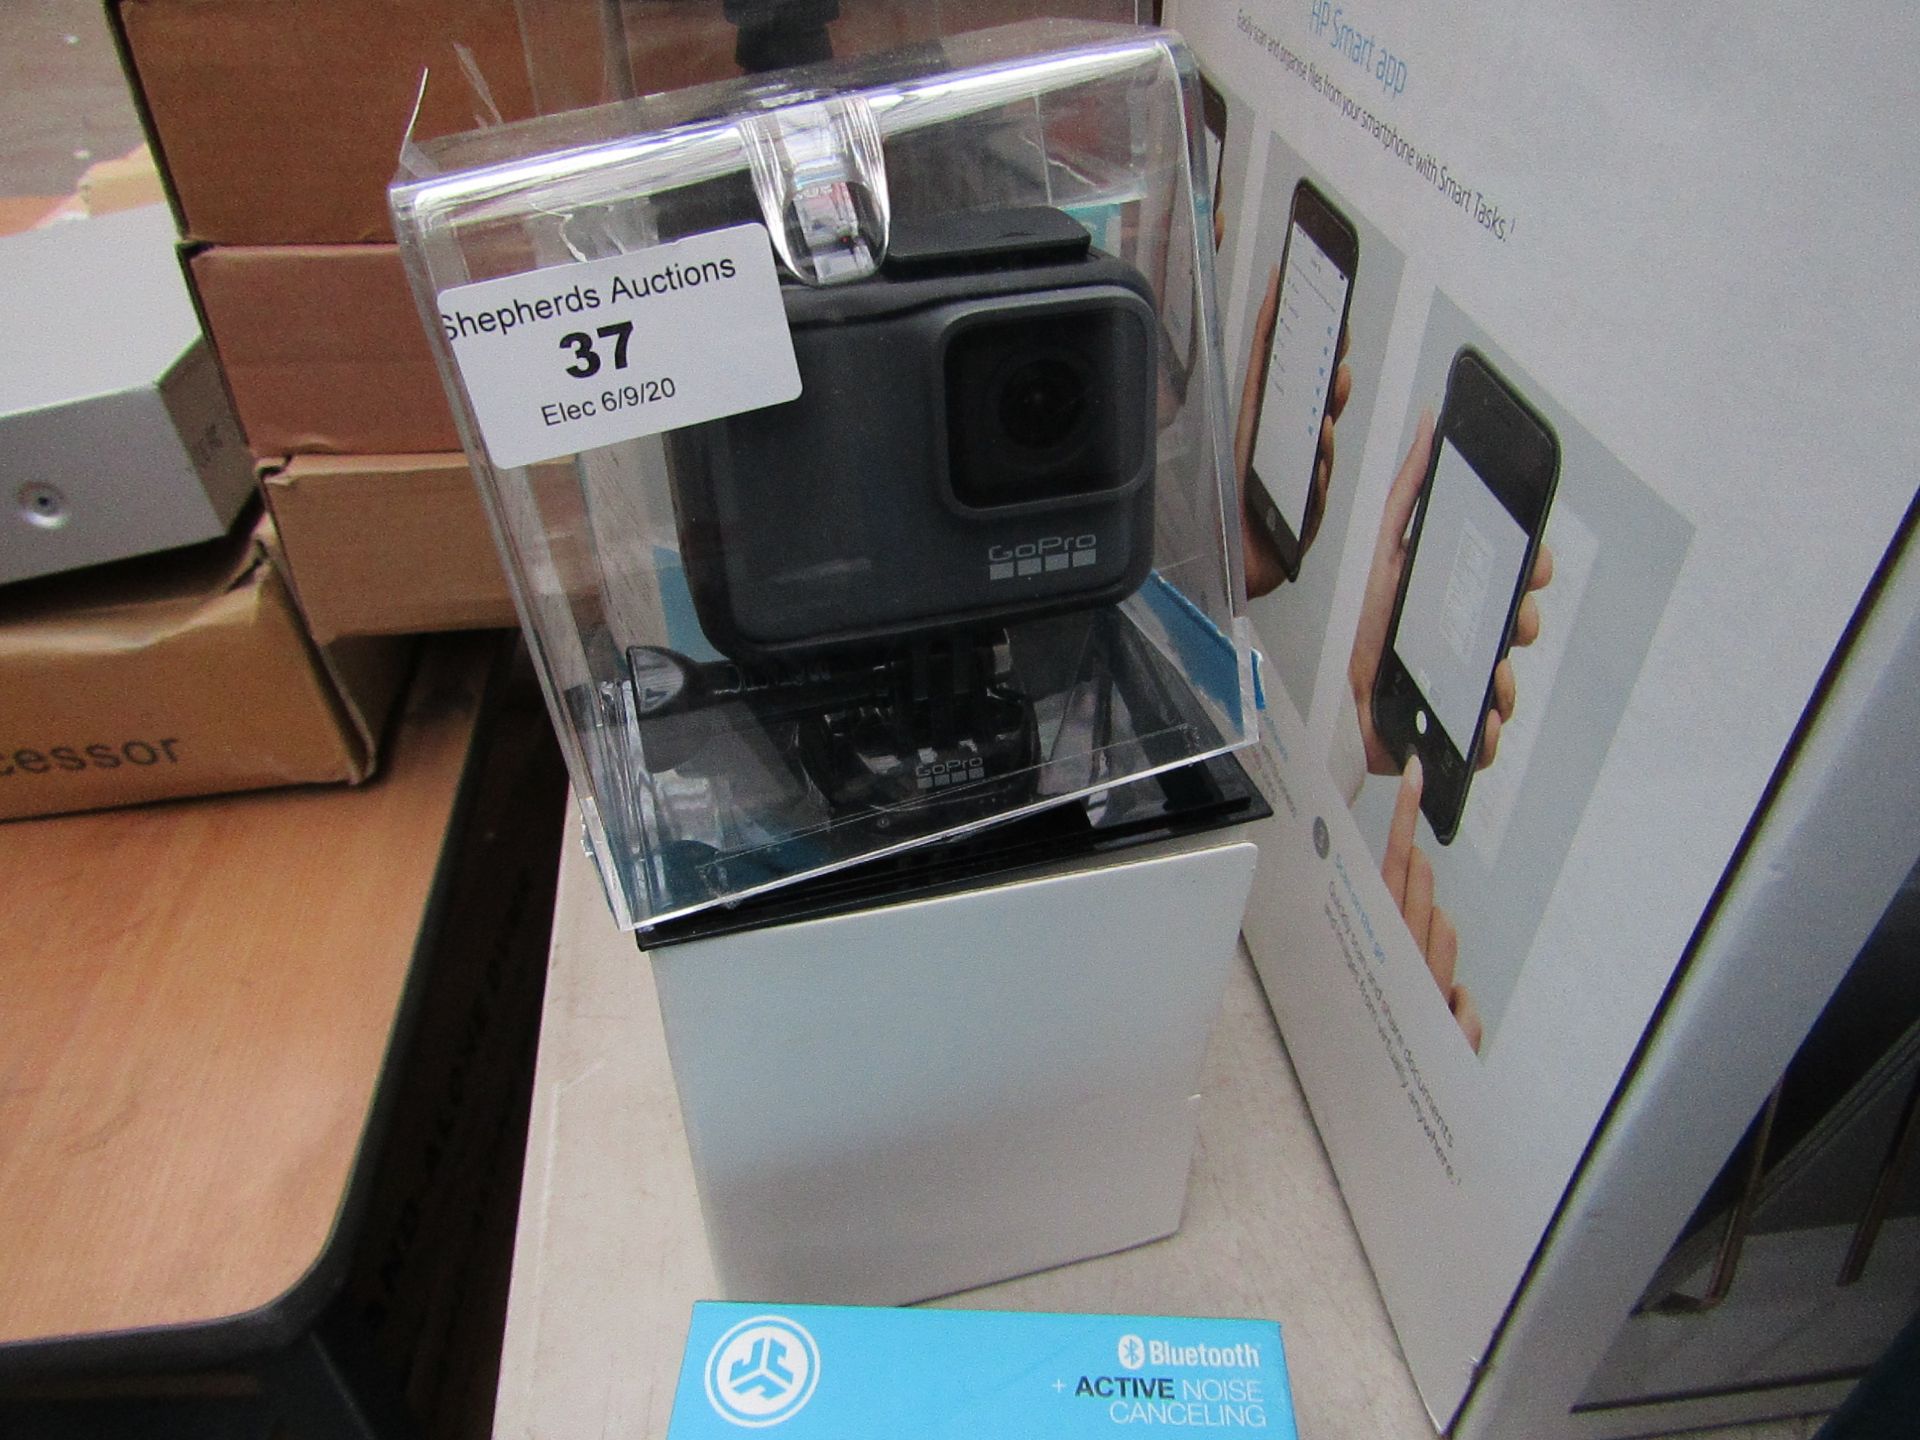 GoPro action camera, unchecked and boxed. RRP Circa £150.00